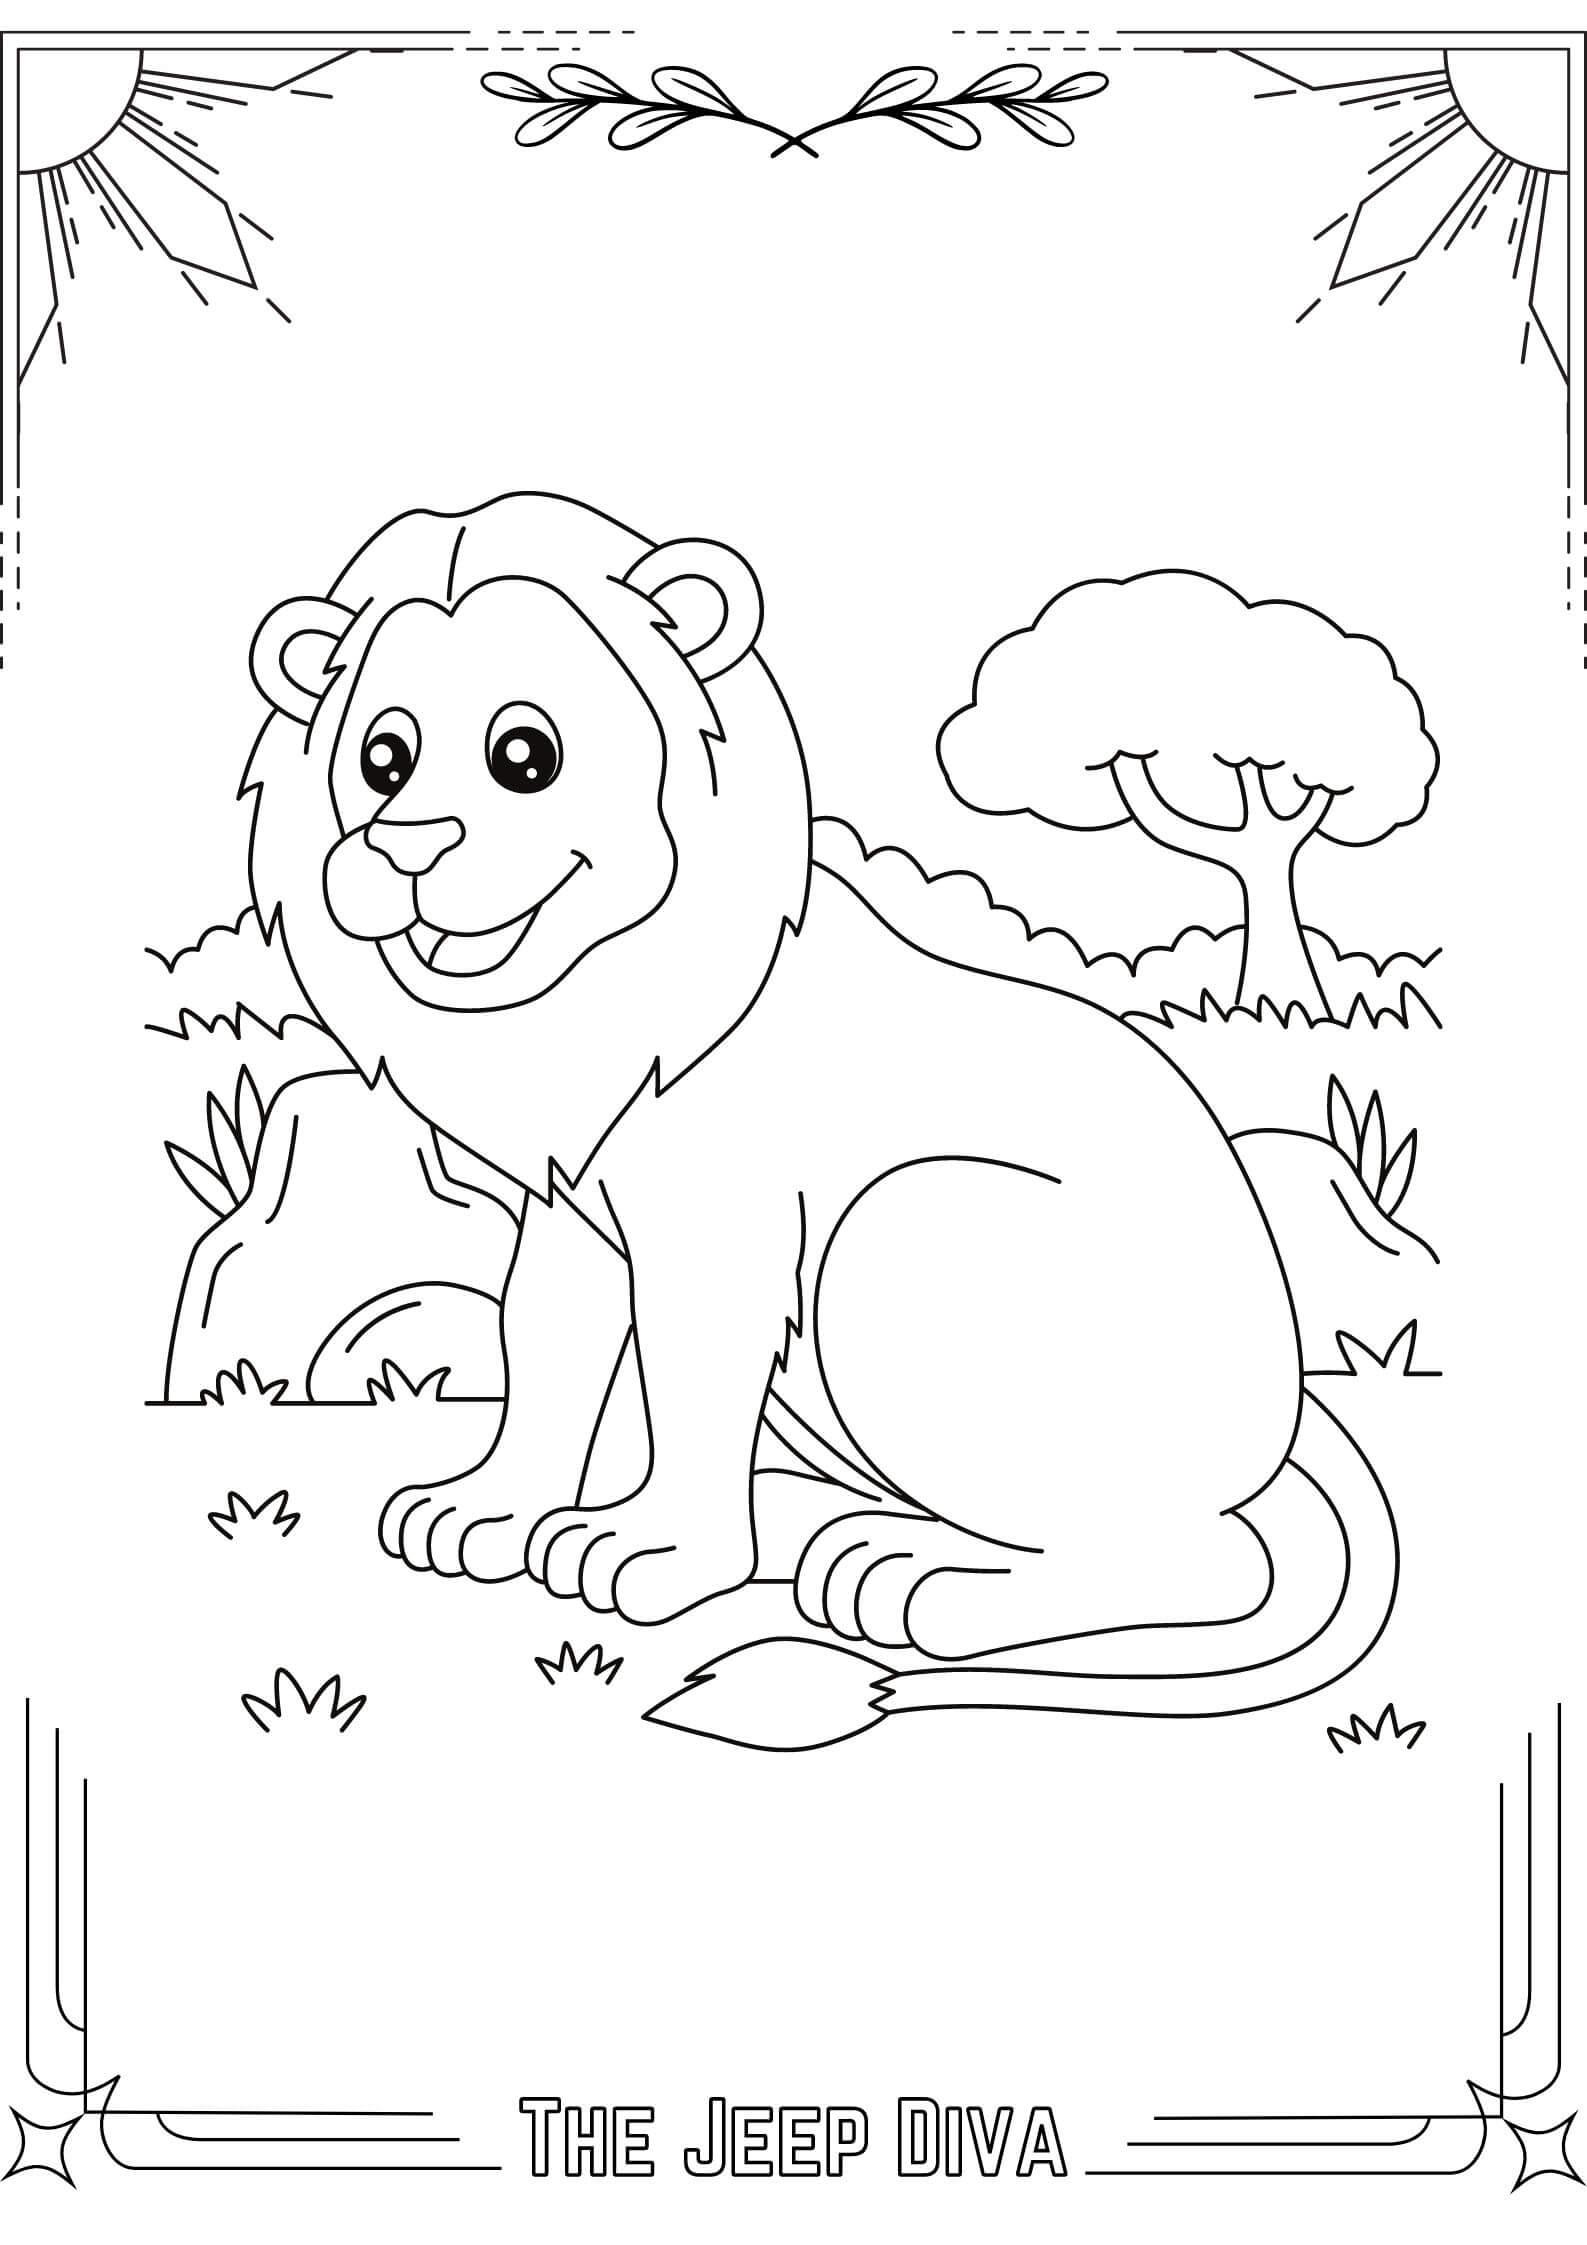 The Jeep Diva Coloring Page 2 Lion